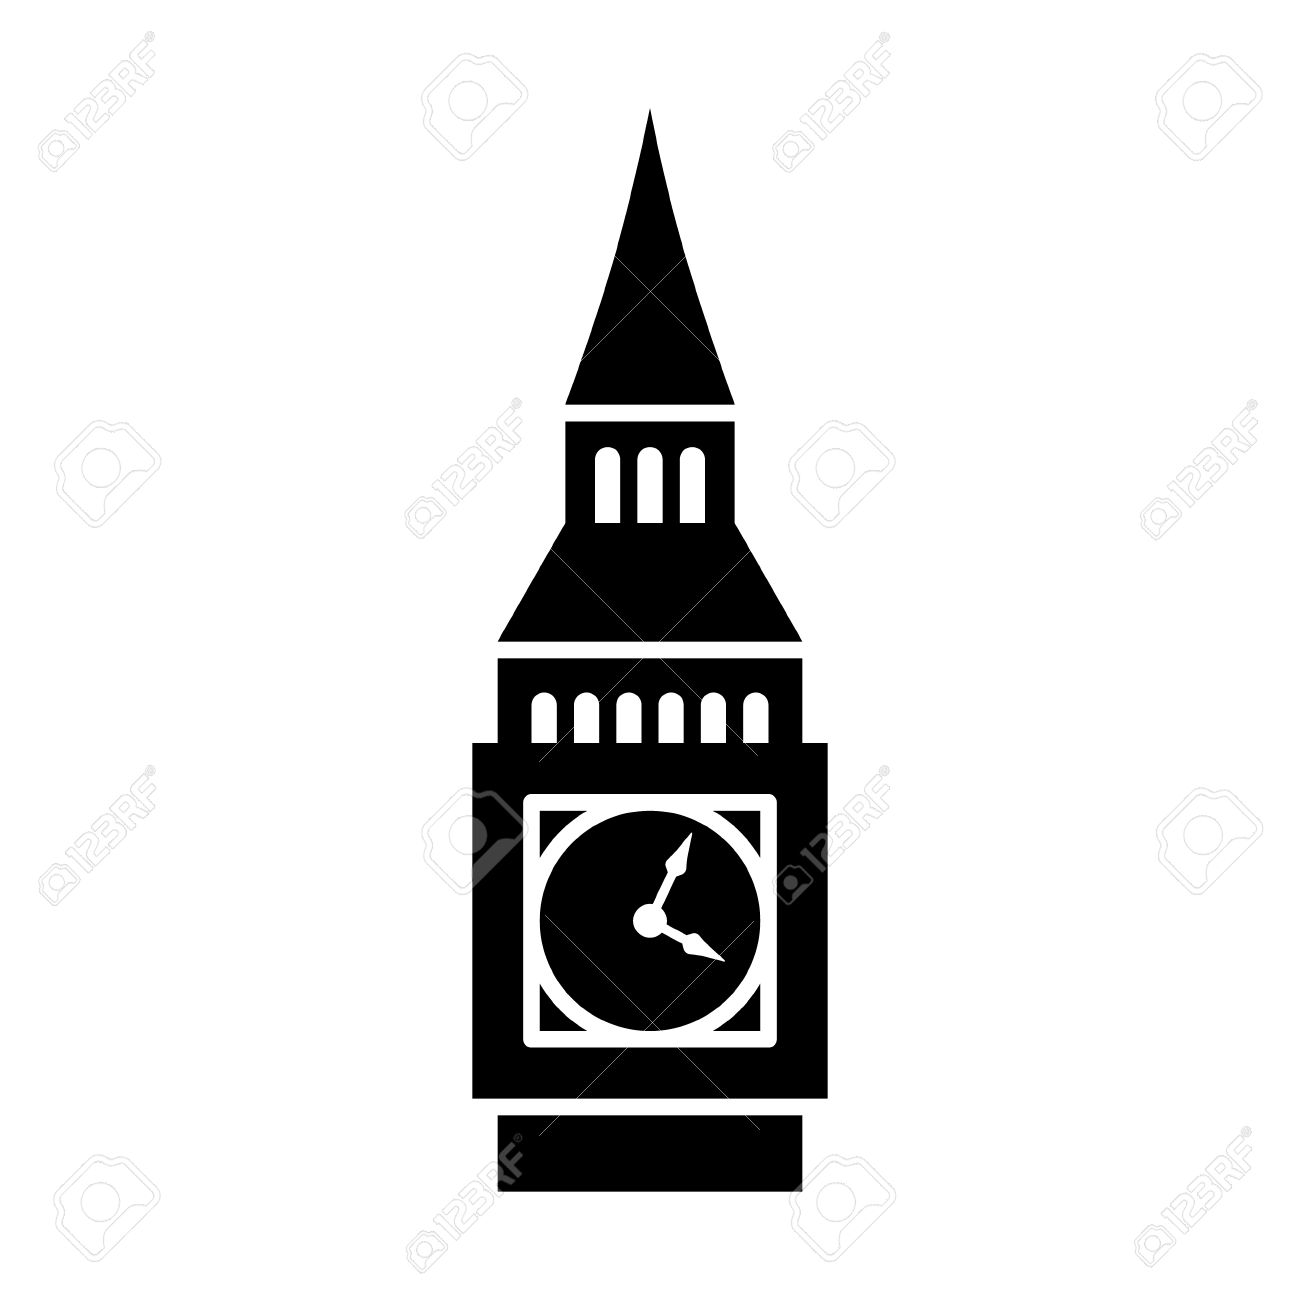 White clock tower clipart 20 free Cliparts | Download images on ...